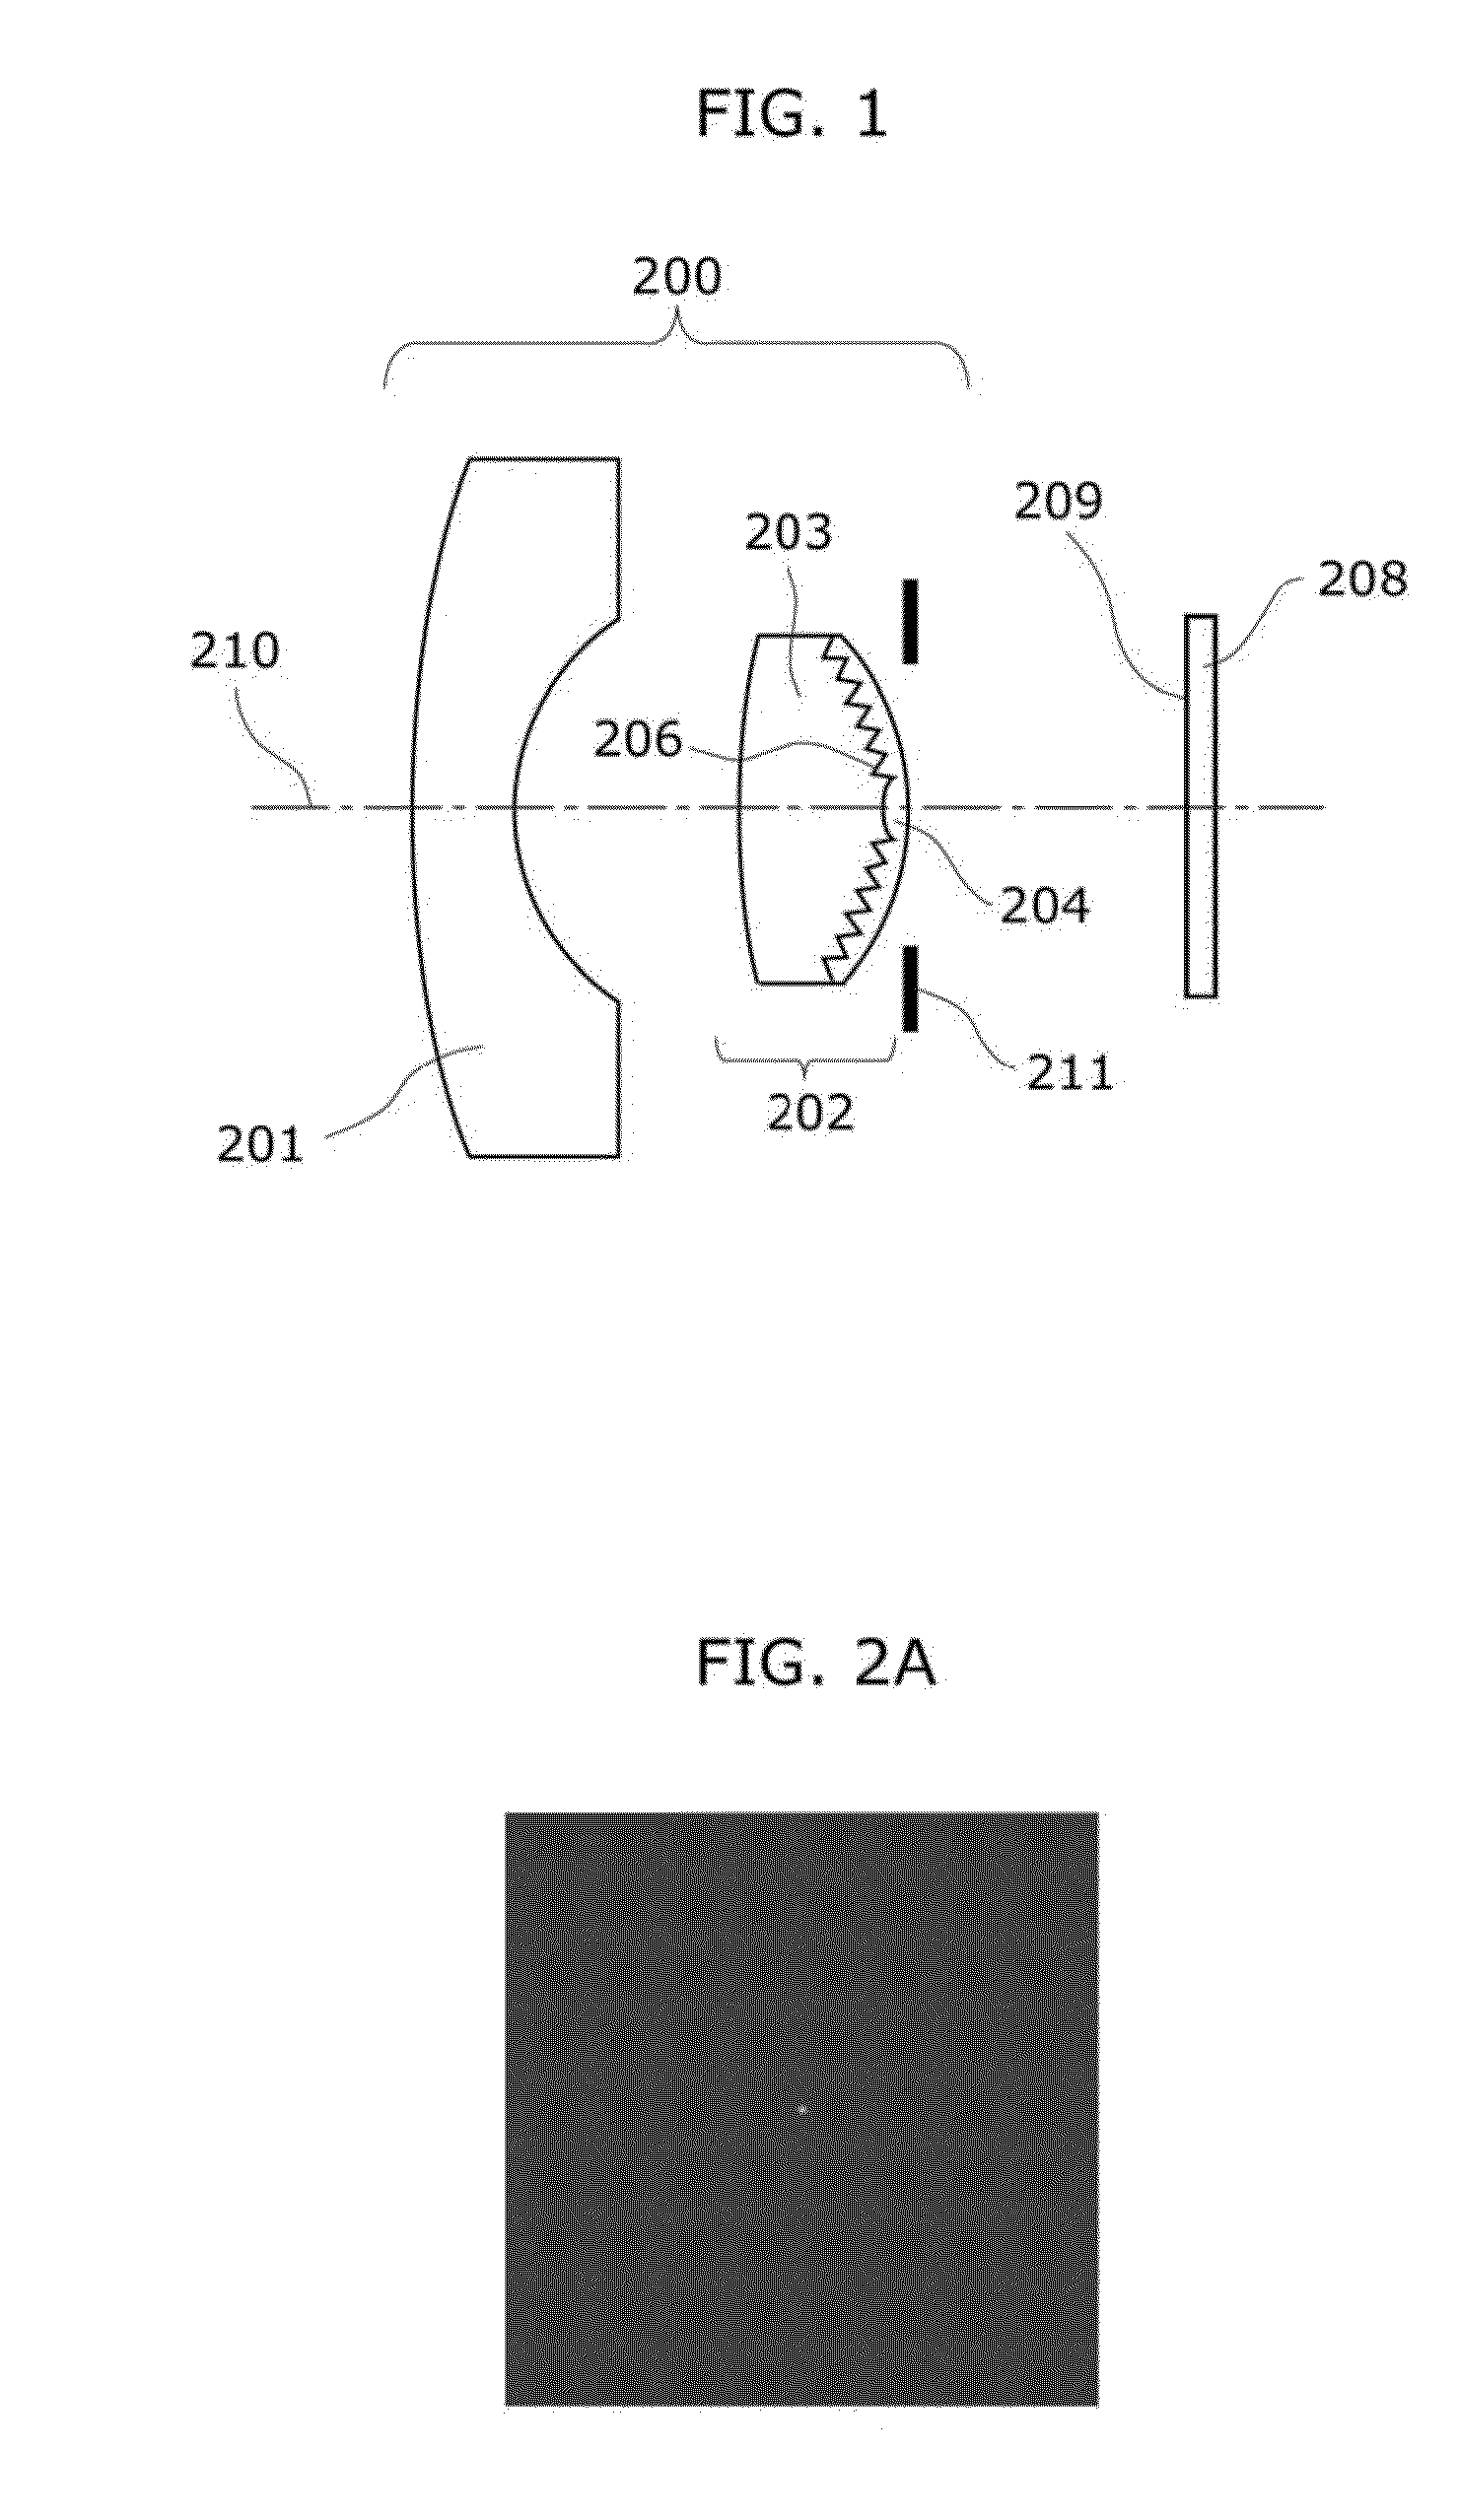 Image processing device, imaging device, and image processing method